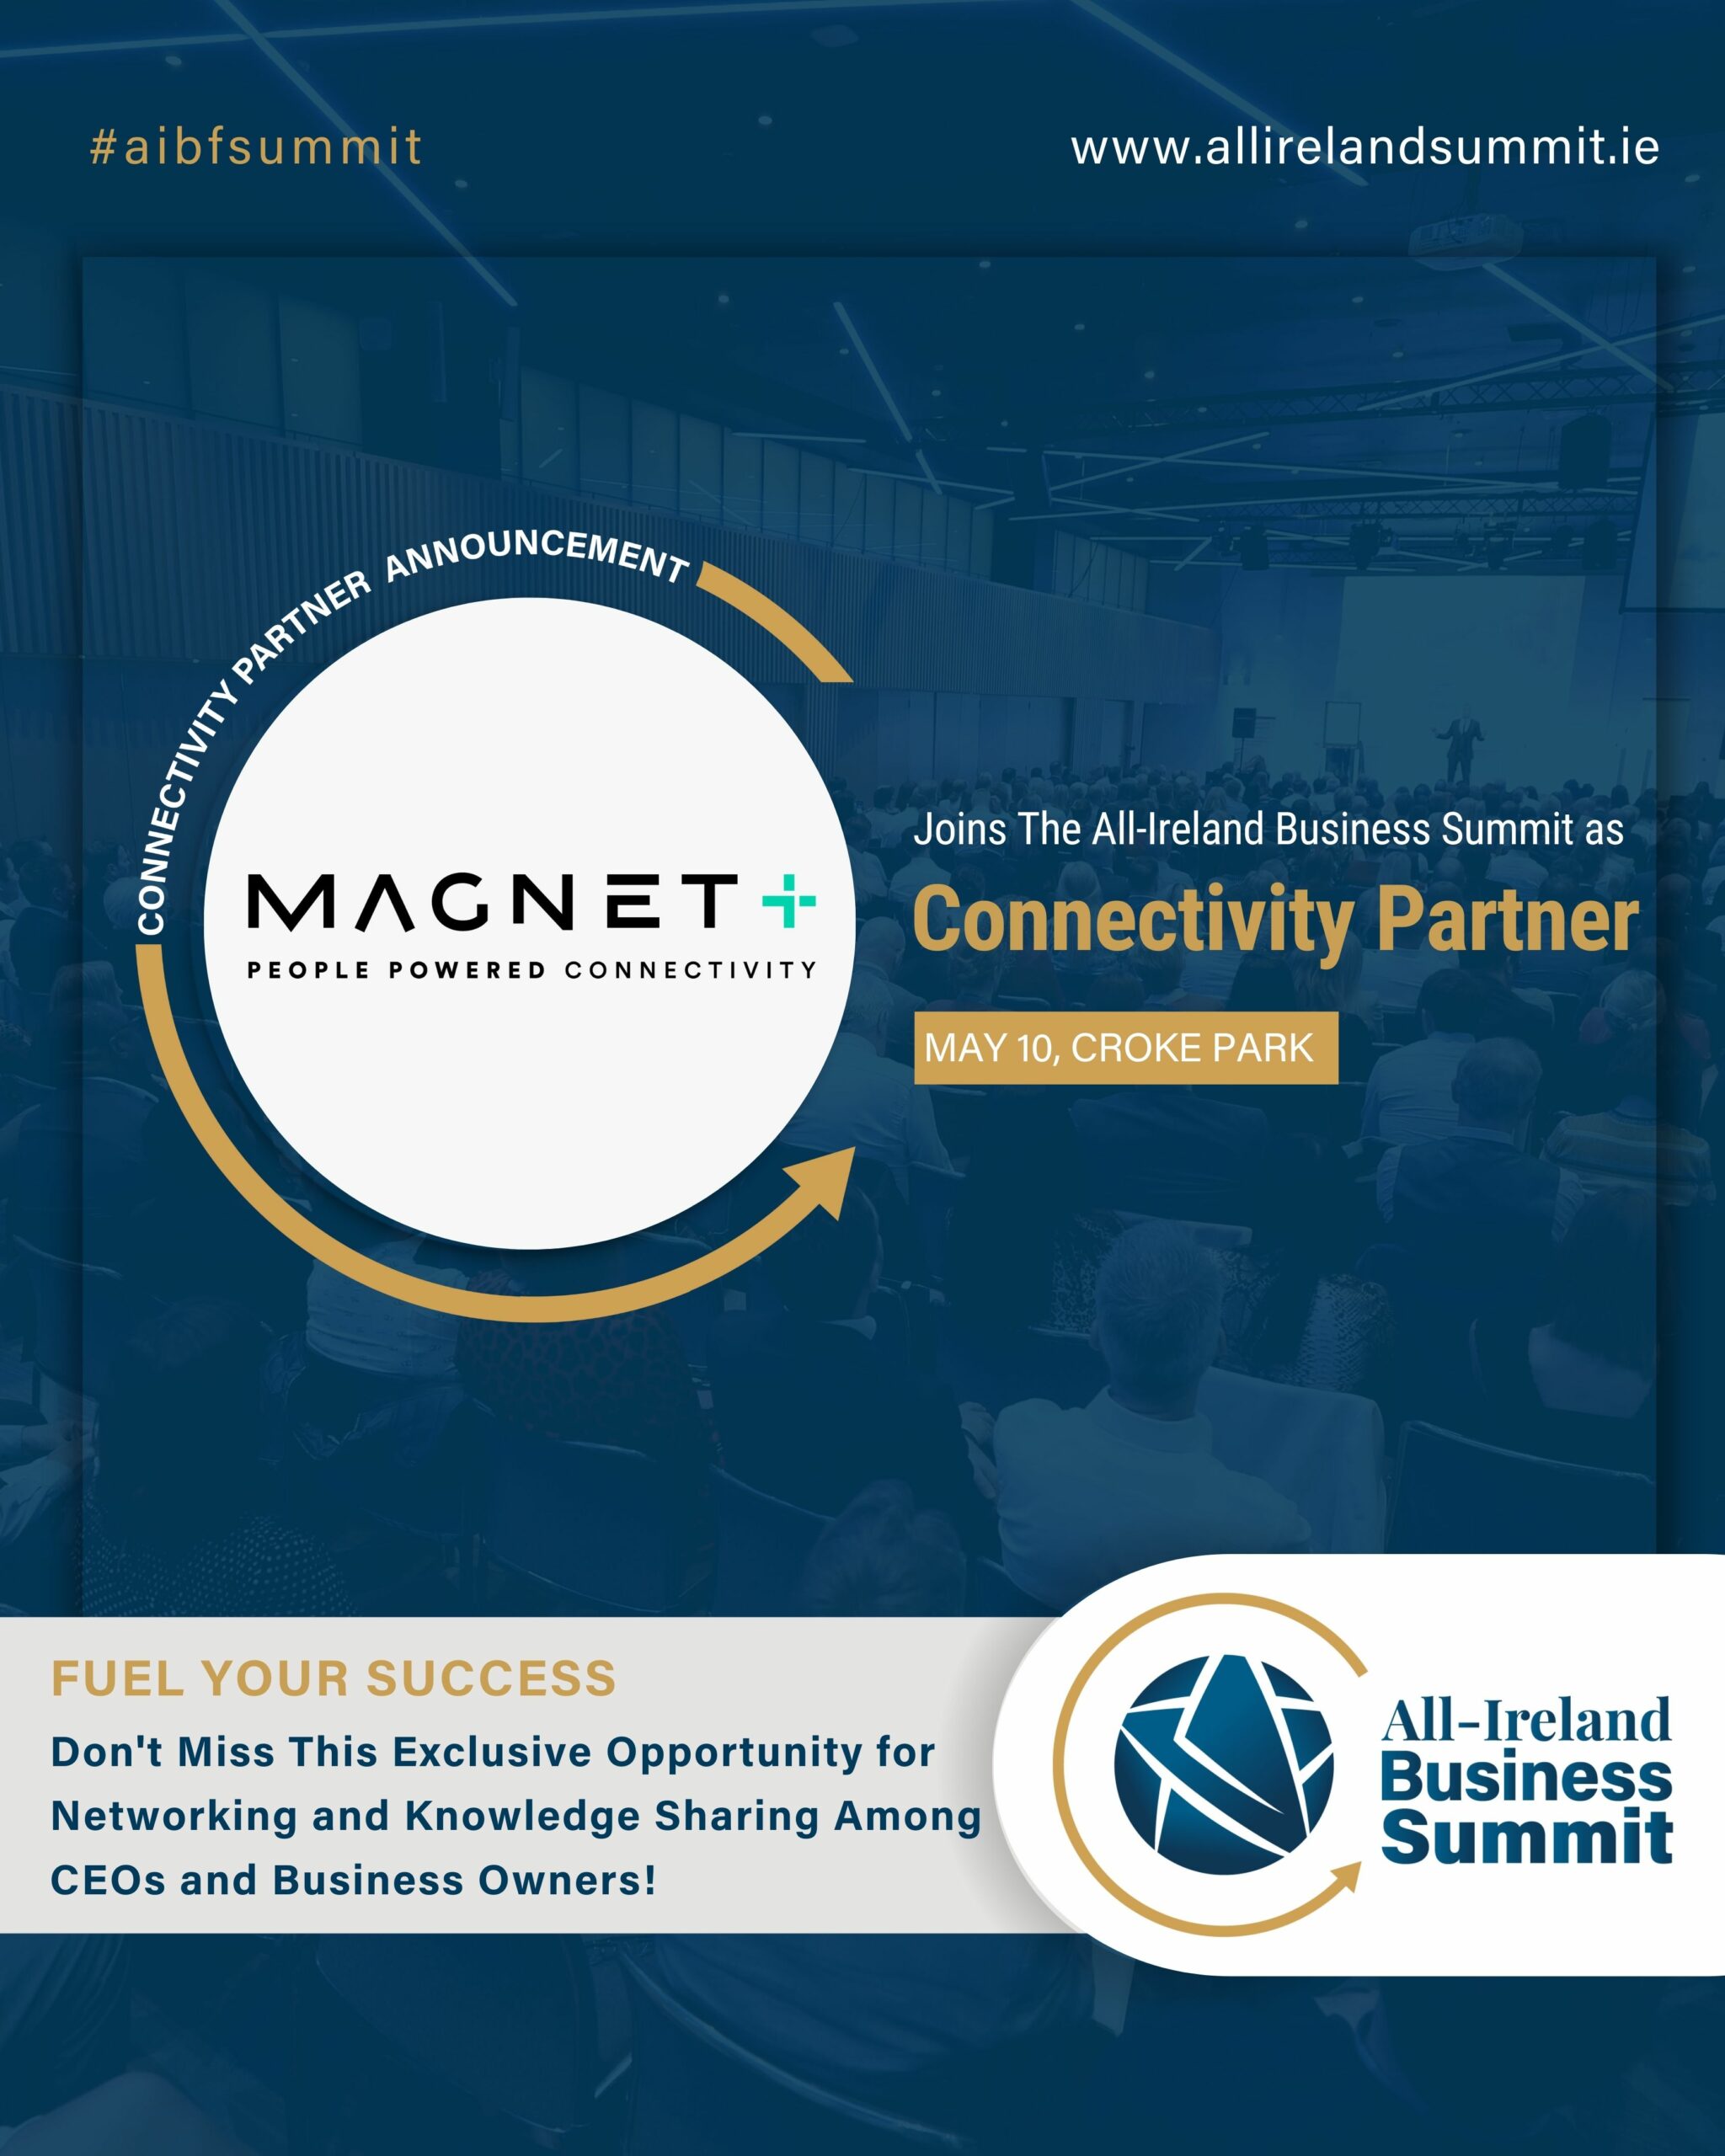 connectivity partner at all-Ireland business summit